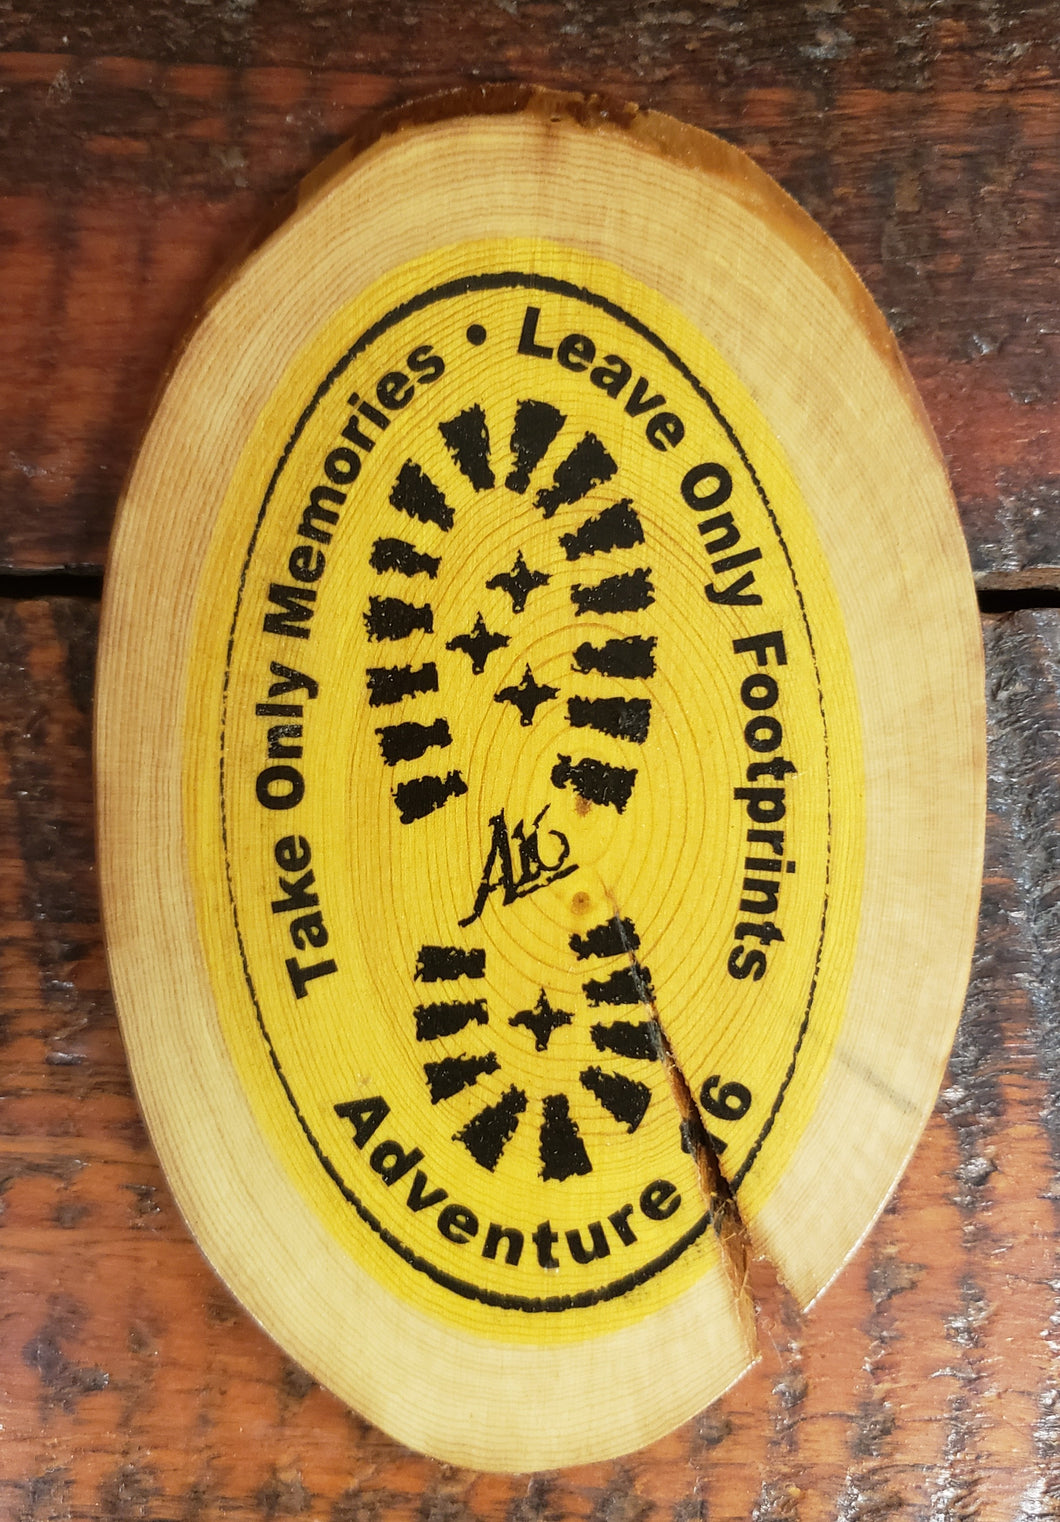 Wood Art A16 Wilderness Ethic Medallion Printed Plaque